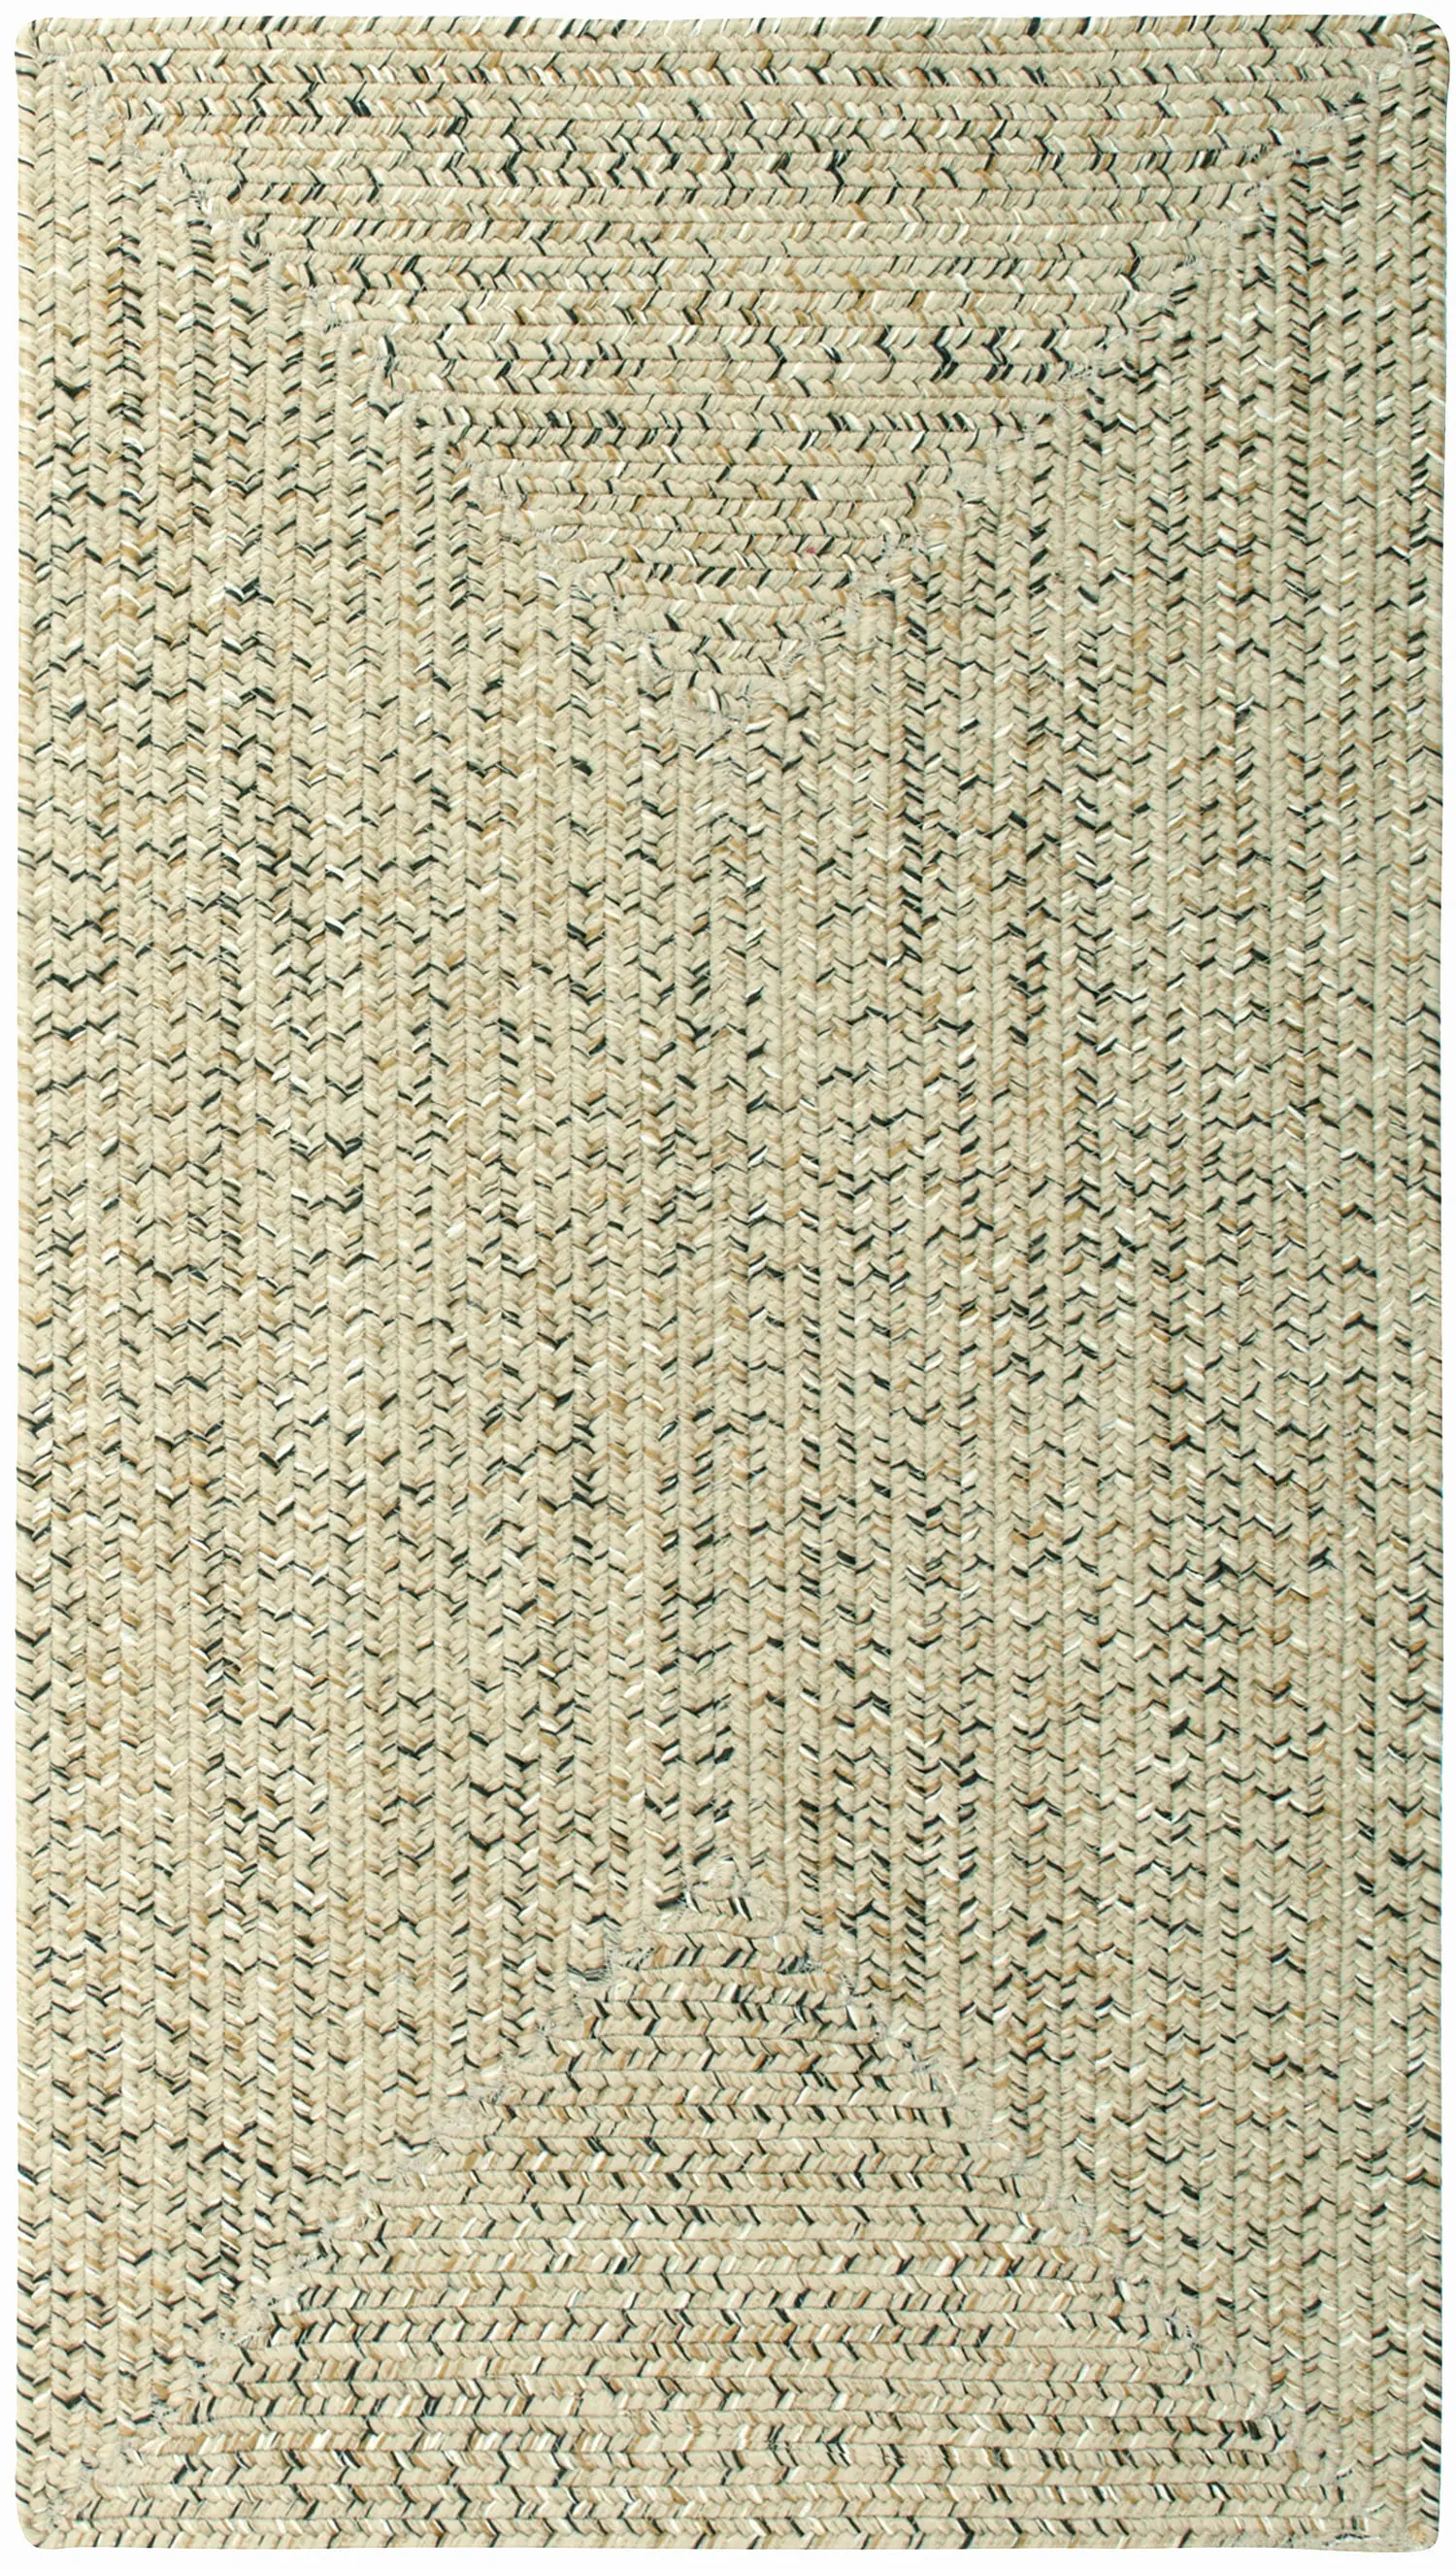 2 x 3 X-Small Shell Taupe Braided Indoor-Outdoor Rug - Sea Glass